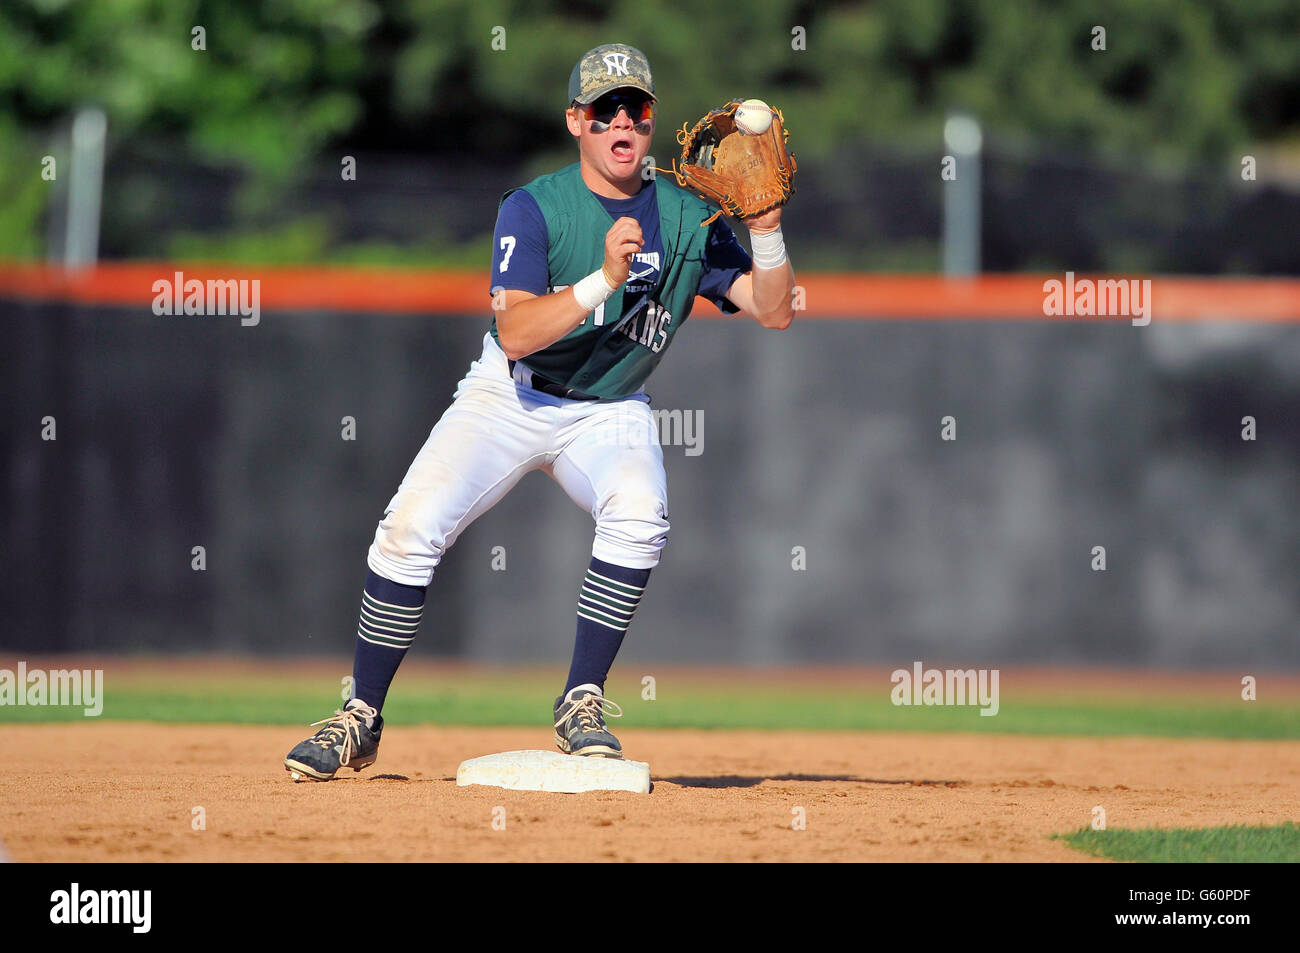 High school infielder at second base accepting a throw before making a relay on a double-play attempt. USA. Stock Photo